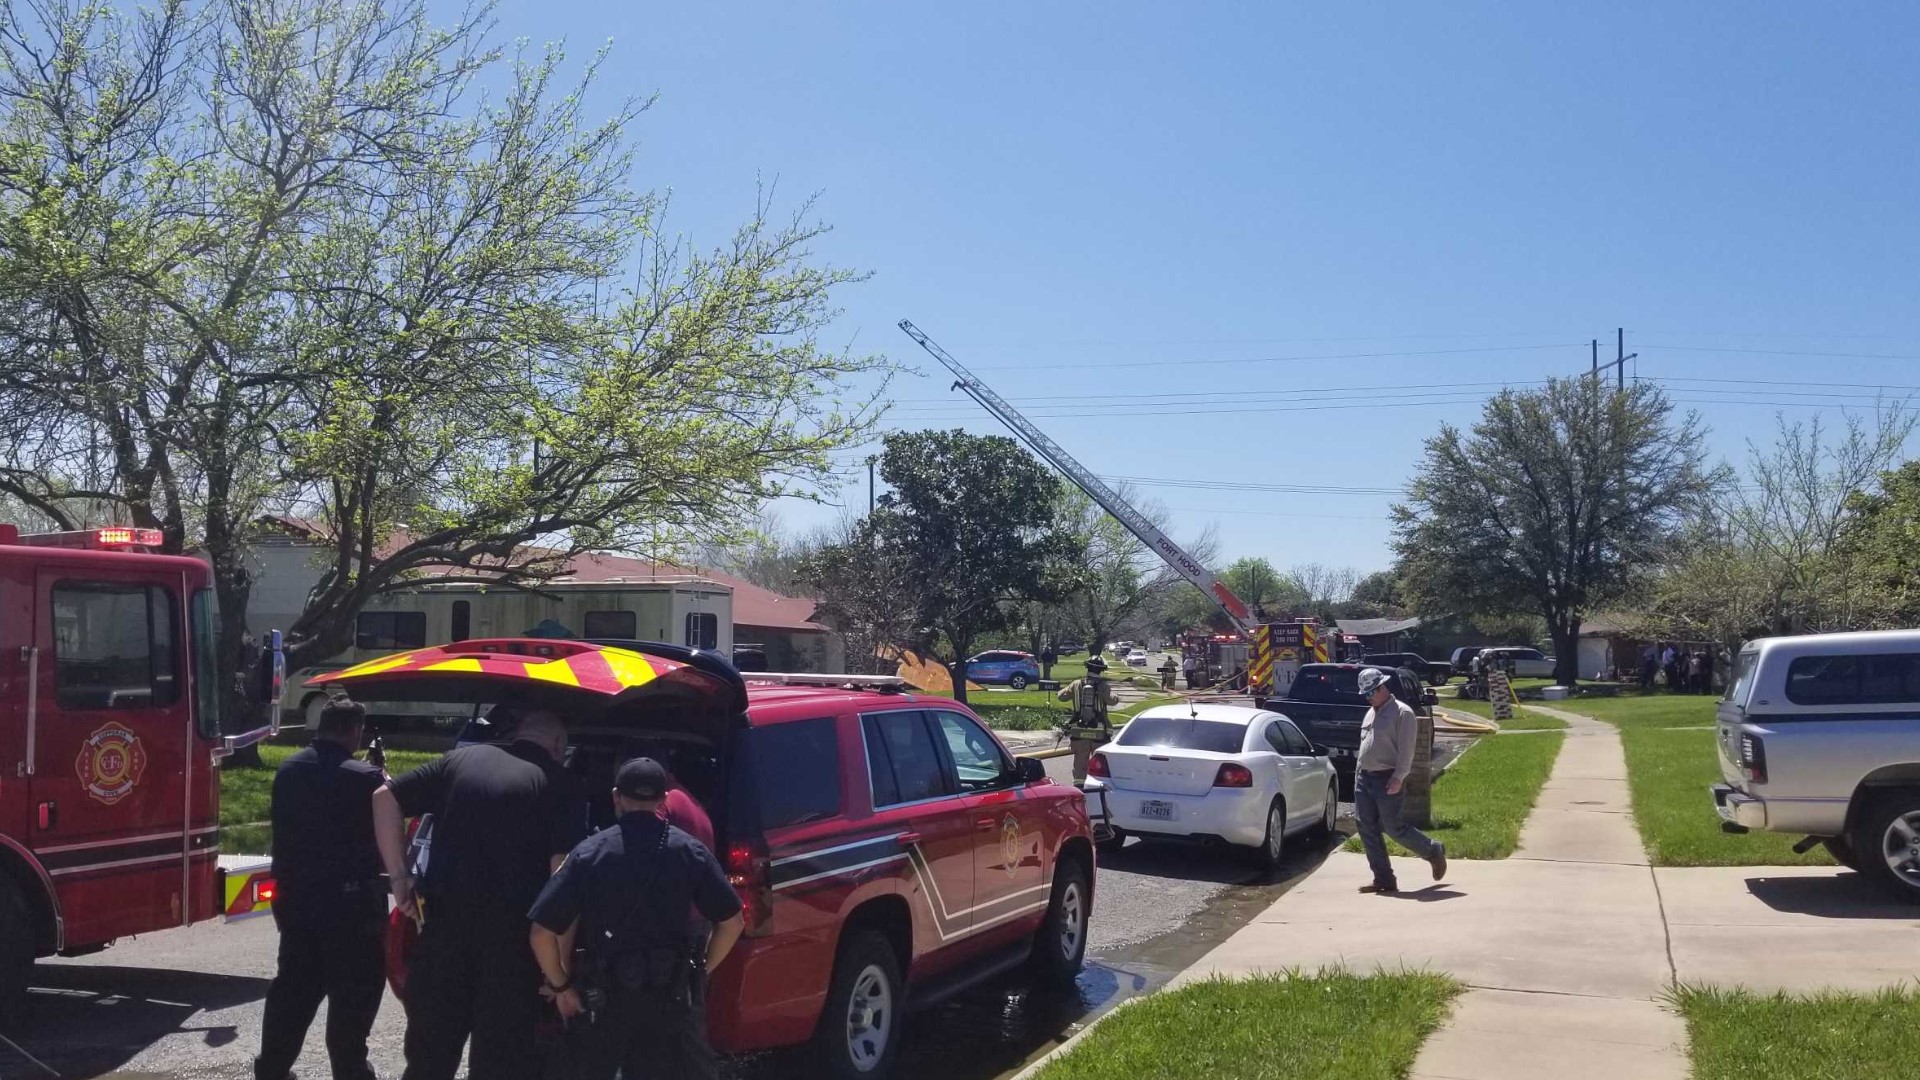 One person in the home was injured after an explosion in a Copperas Cove neighborhood Tuesday.